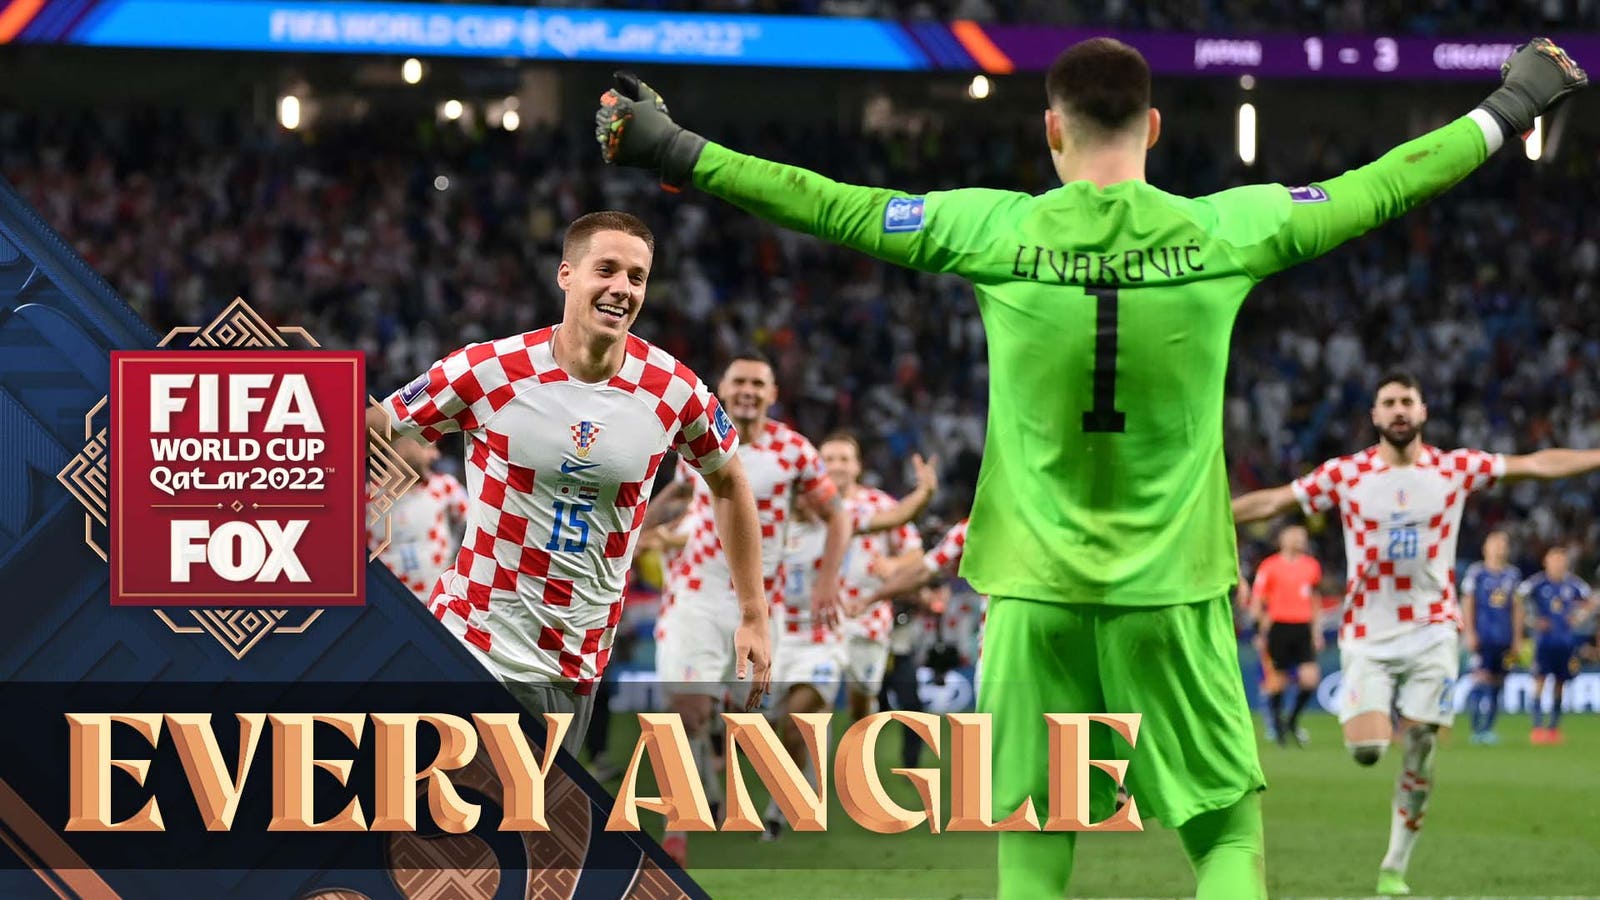 Croatia's Dominik Rybakovic will hold the fort against Brazil in the 2022 FIFA World Cup. FOXsoccer